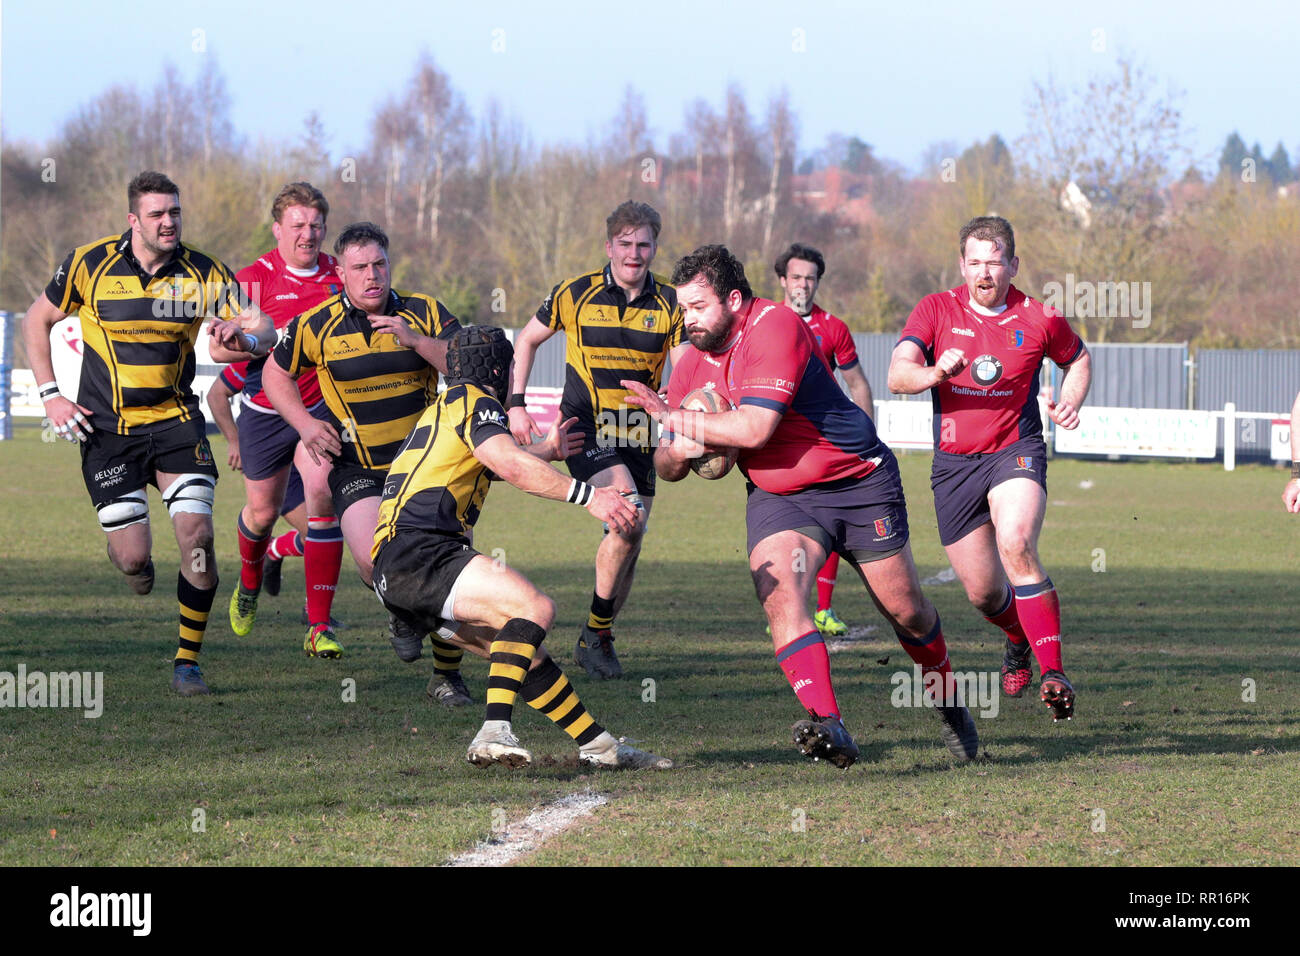 23.02.2019 Hinckley, Leicester, England. Rugby Union, Hinckley rfc v Chester rfc. Oliver Hughes on the charge Chester  during the RFU National League  Stock Photo